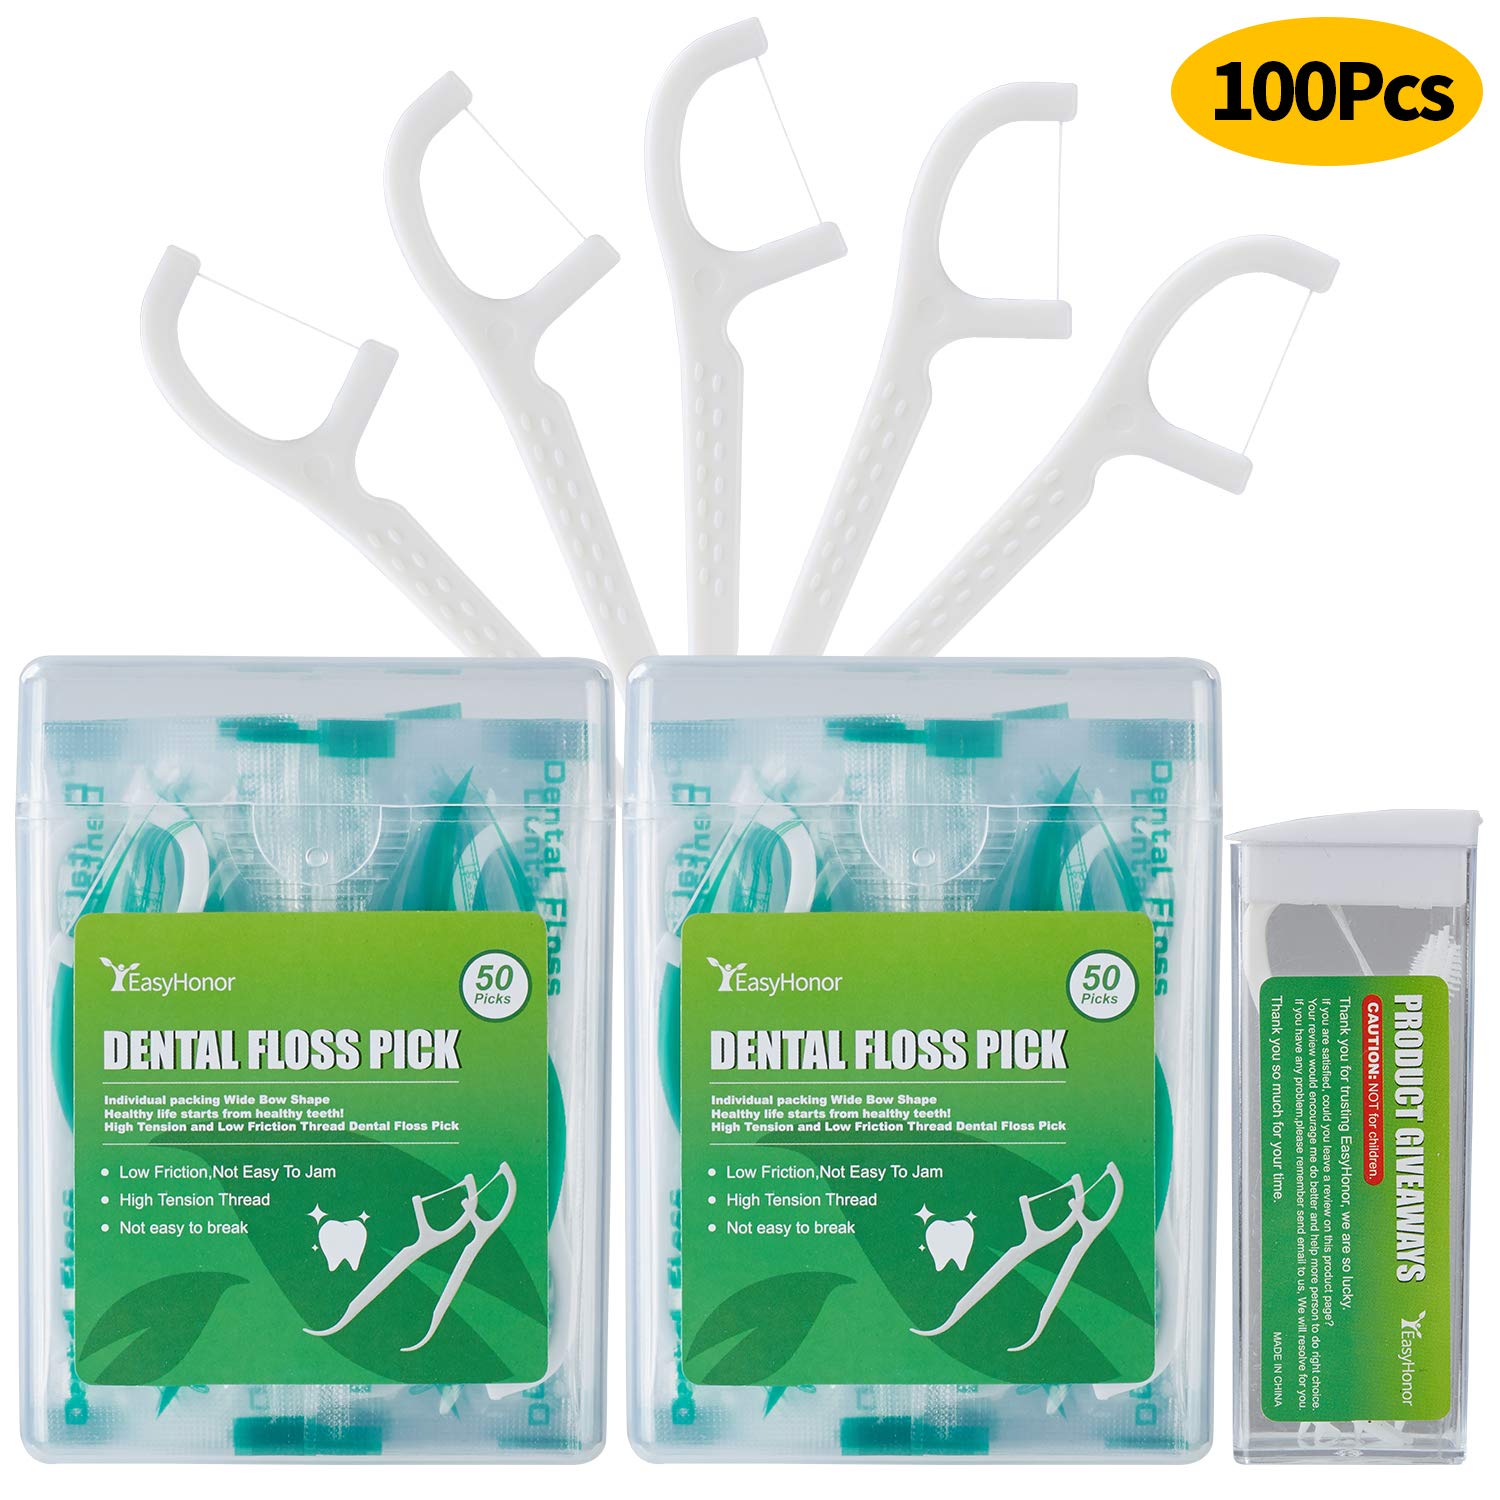 Dental Floss Picks, 2 Travel Floss Cases,100 Counts,Each Individually Wrapped, Dental Flossers,Floss Sticks,Tooth Floss,Dental Sticks,Teeth Flossers Picks,Gift 1 Mini Toothpick Box.